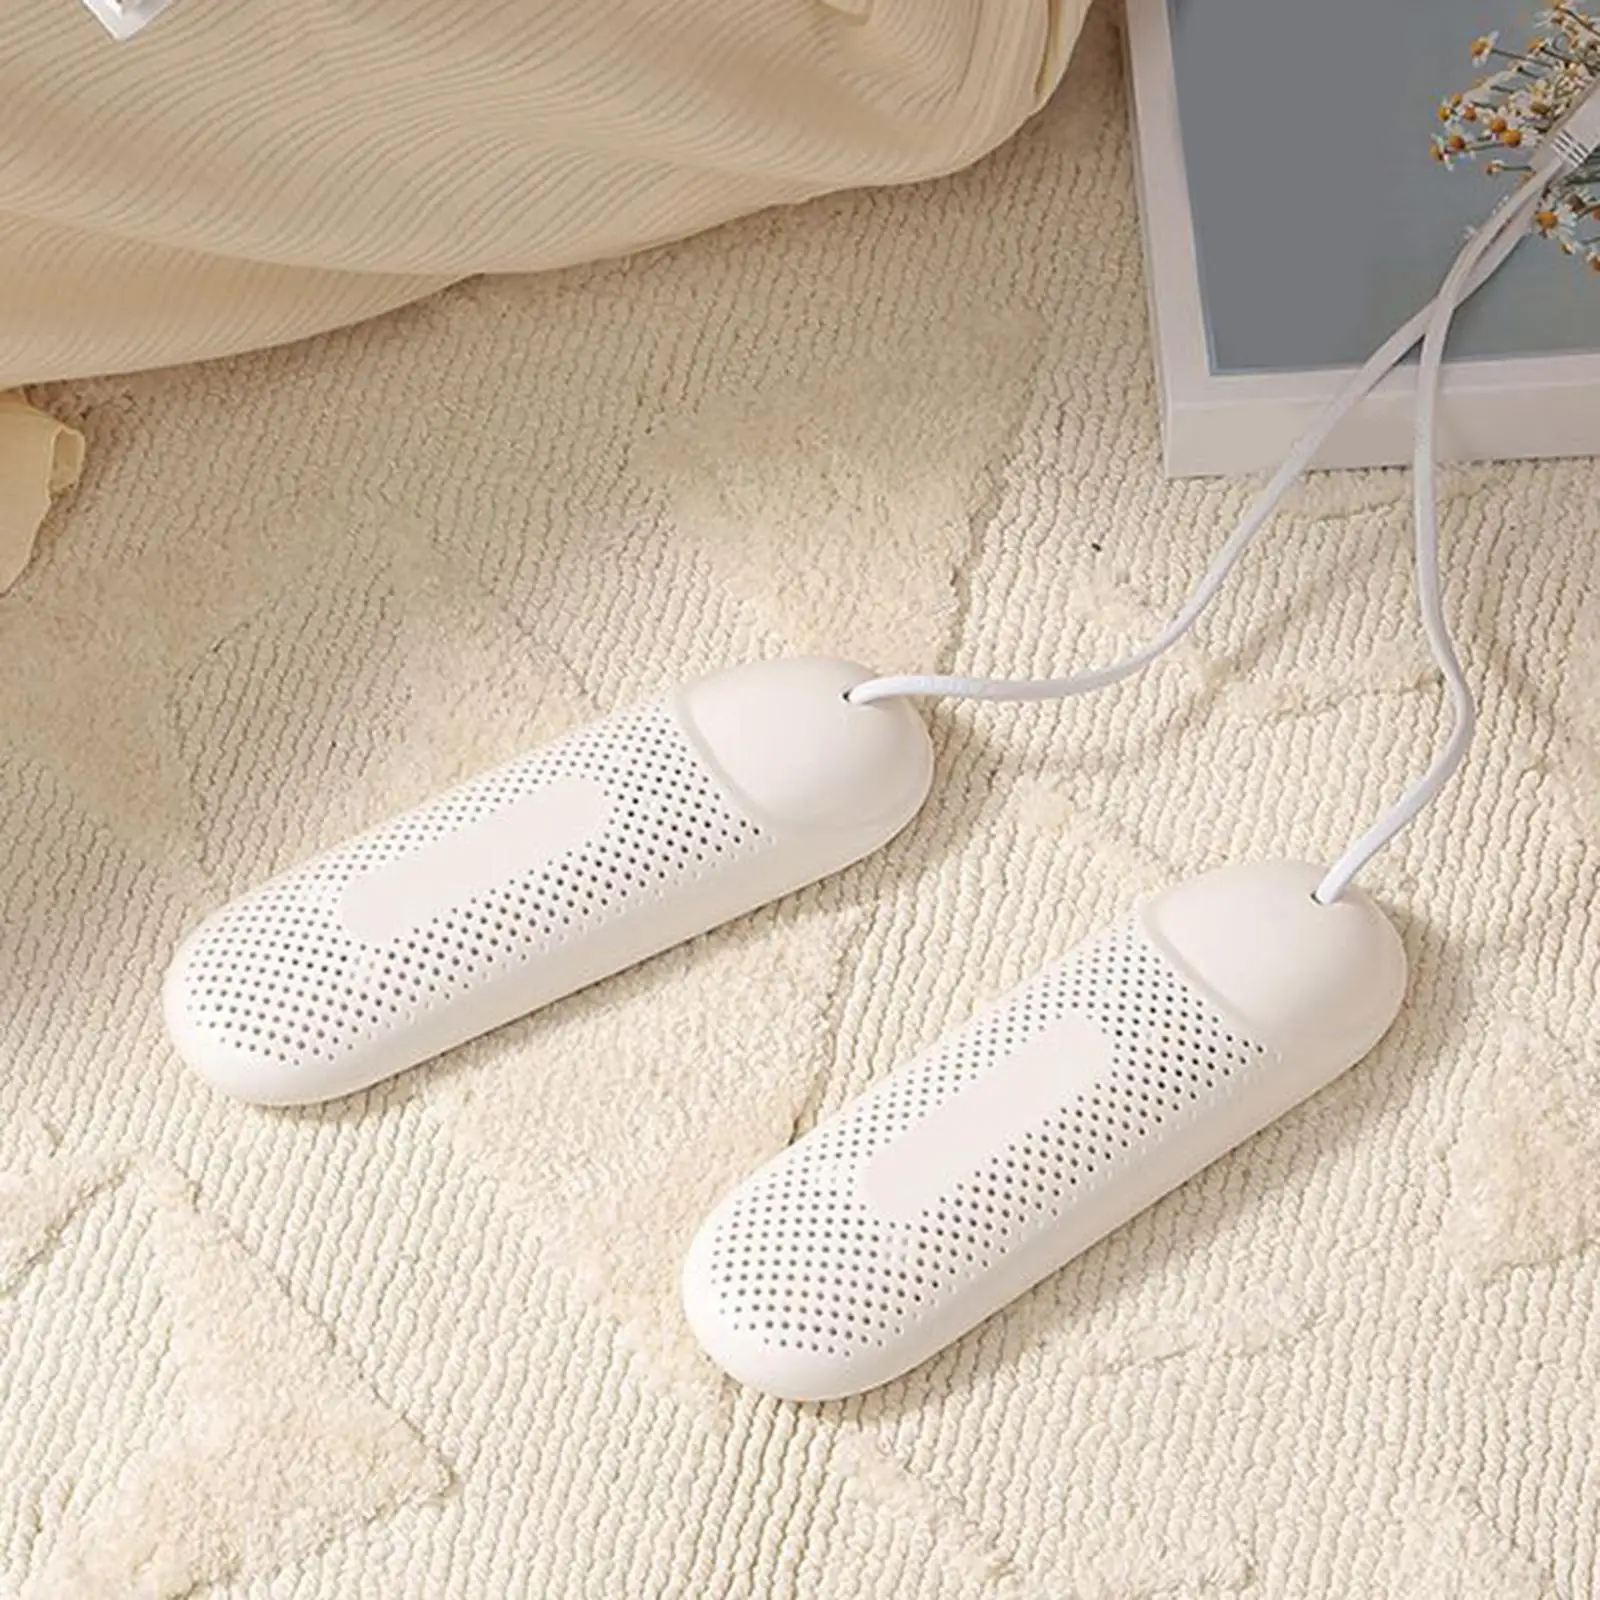 Compact Shoe Dryer Foot Protector Odor Deodorant Heater Dehumidify Device Boot Race Car Shape Electric for Home Family Winter